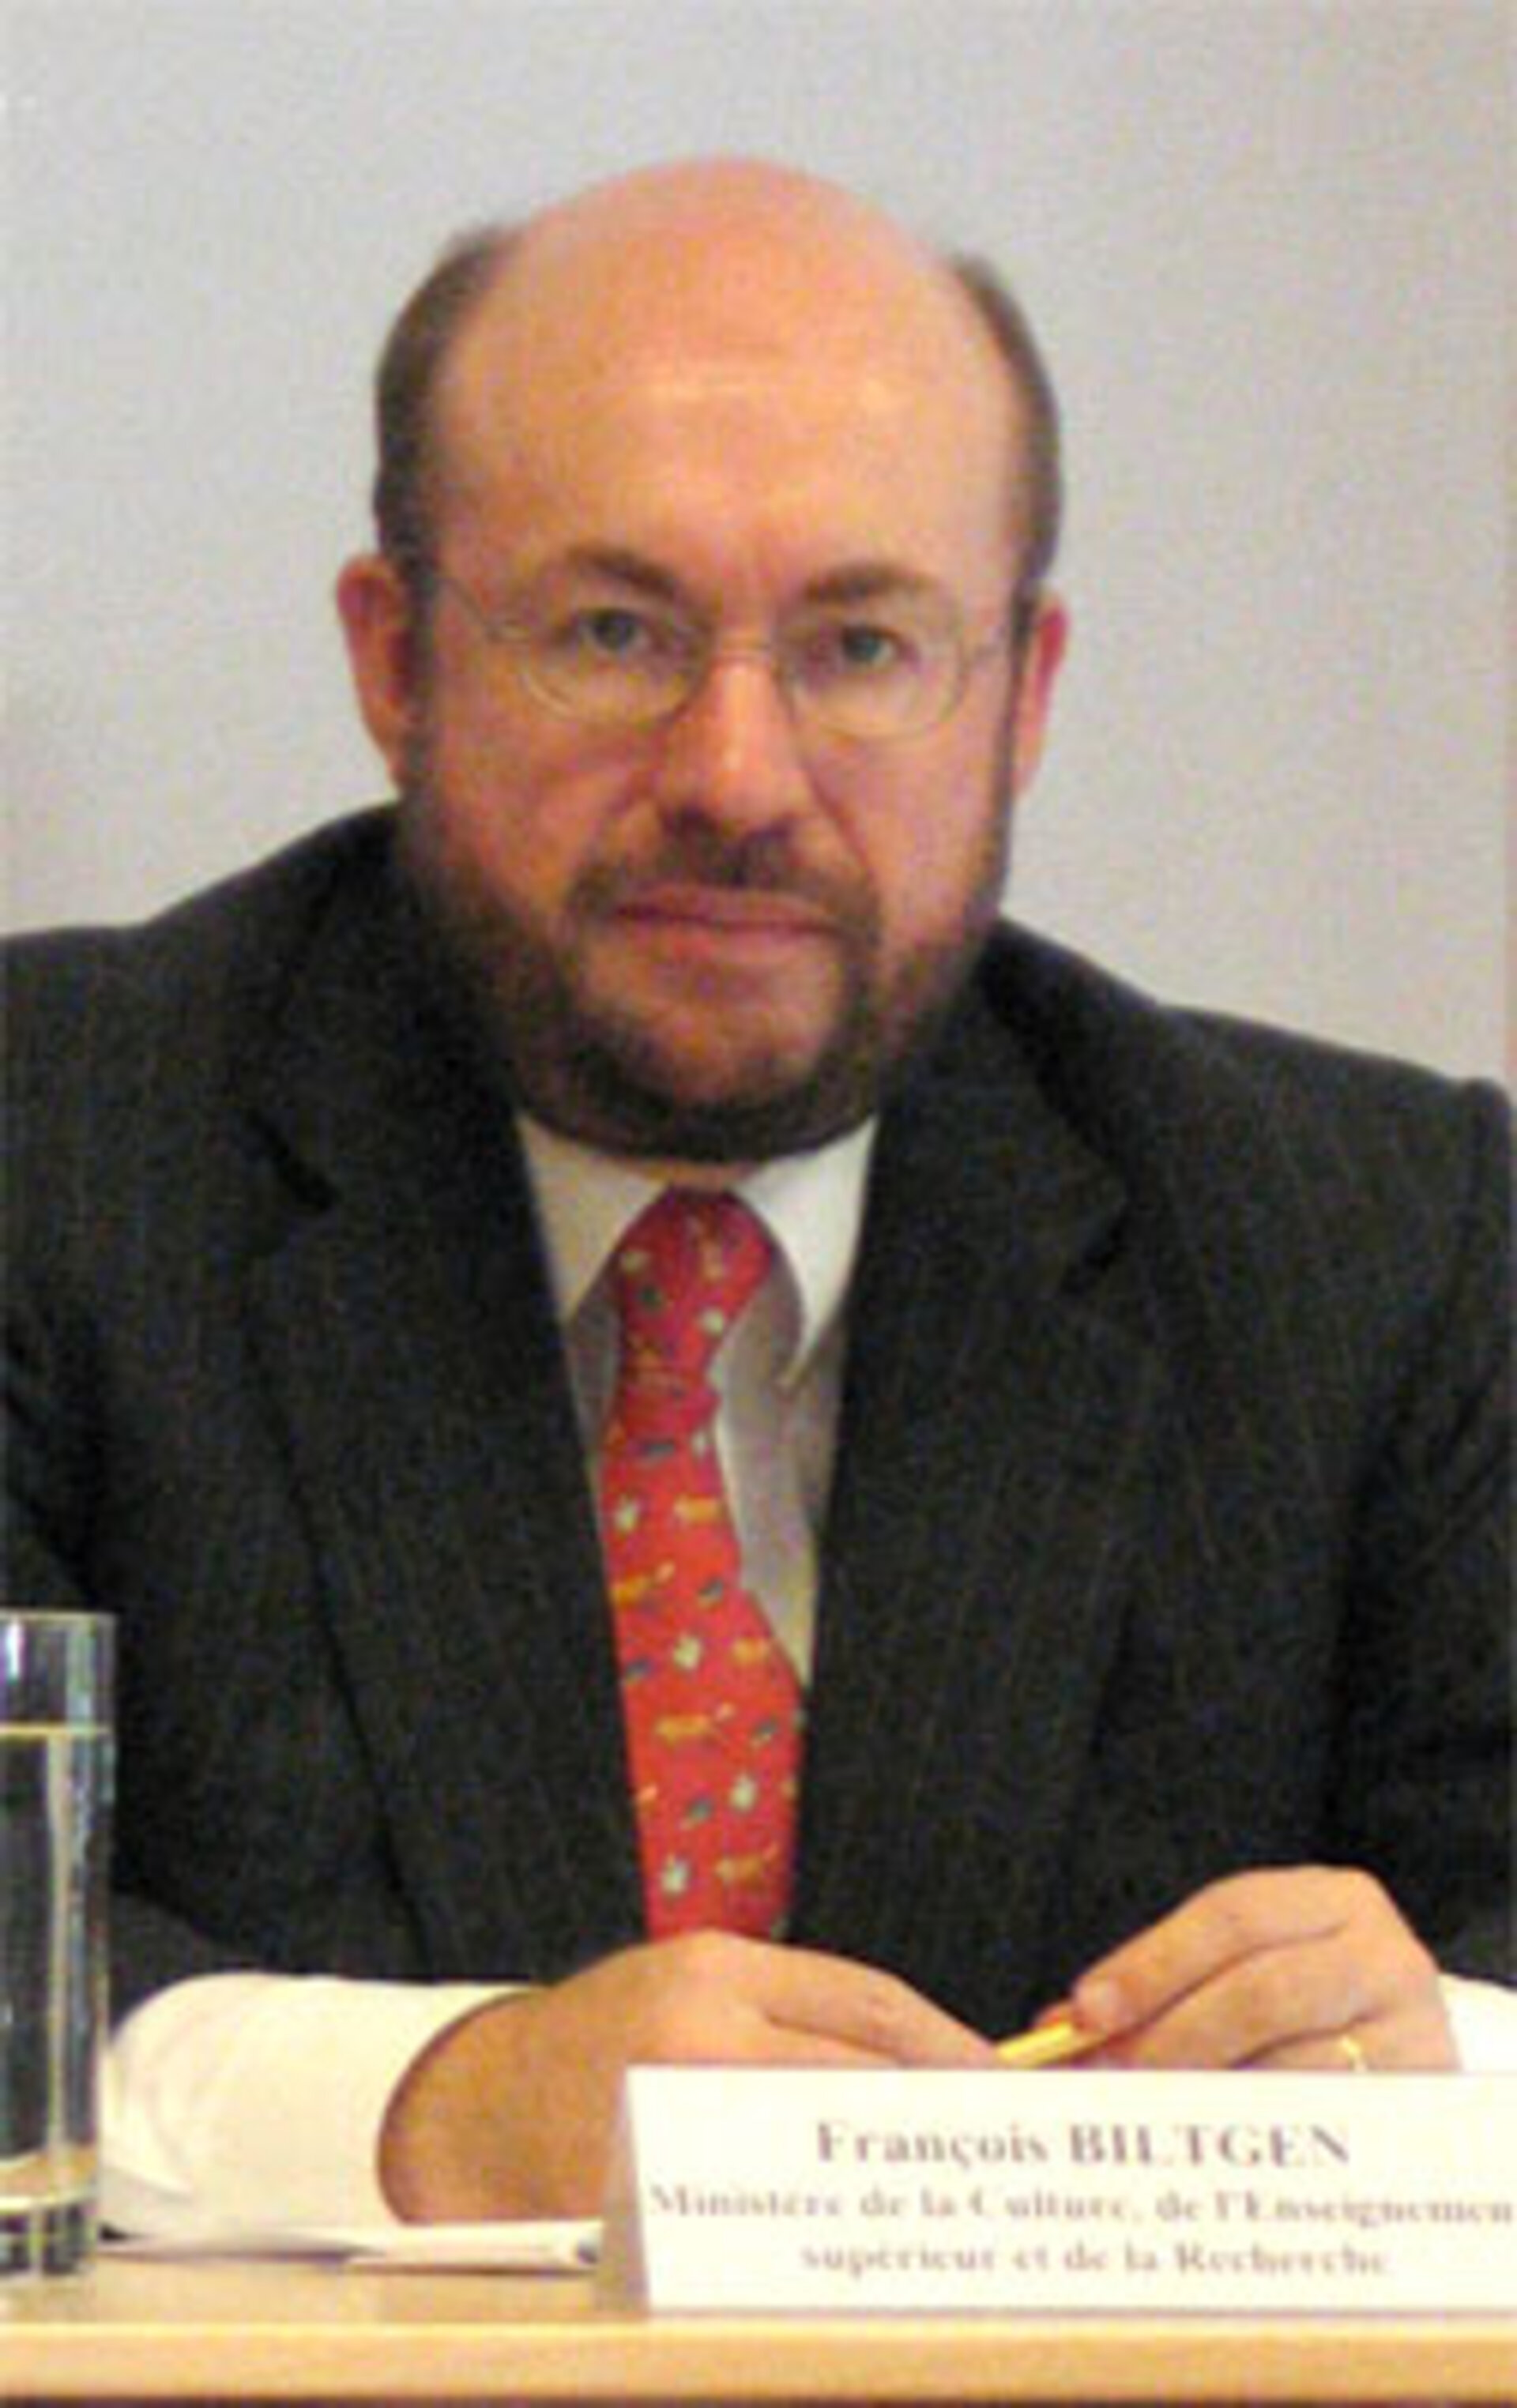 François Biltgen, Luxembourg Minister of Culture and Research